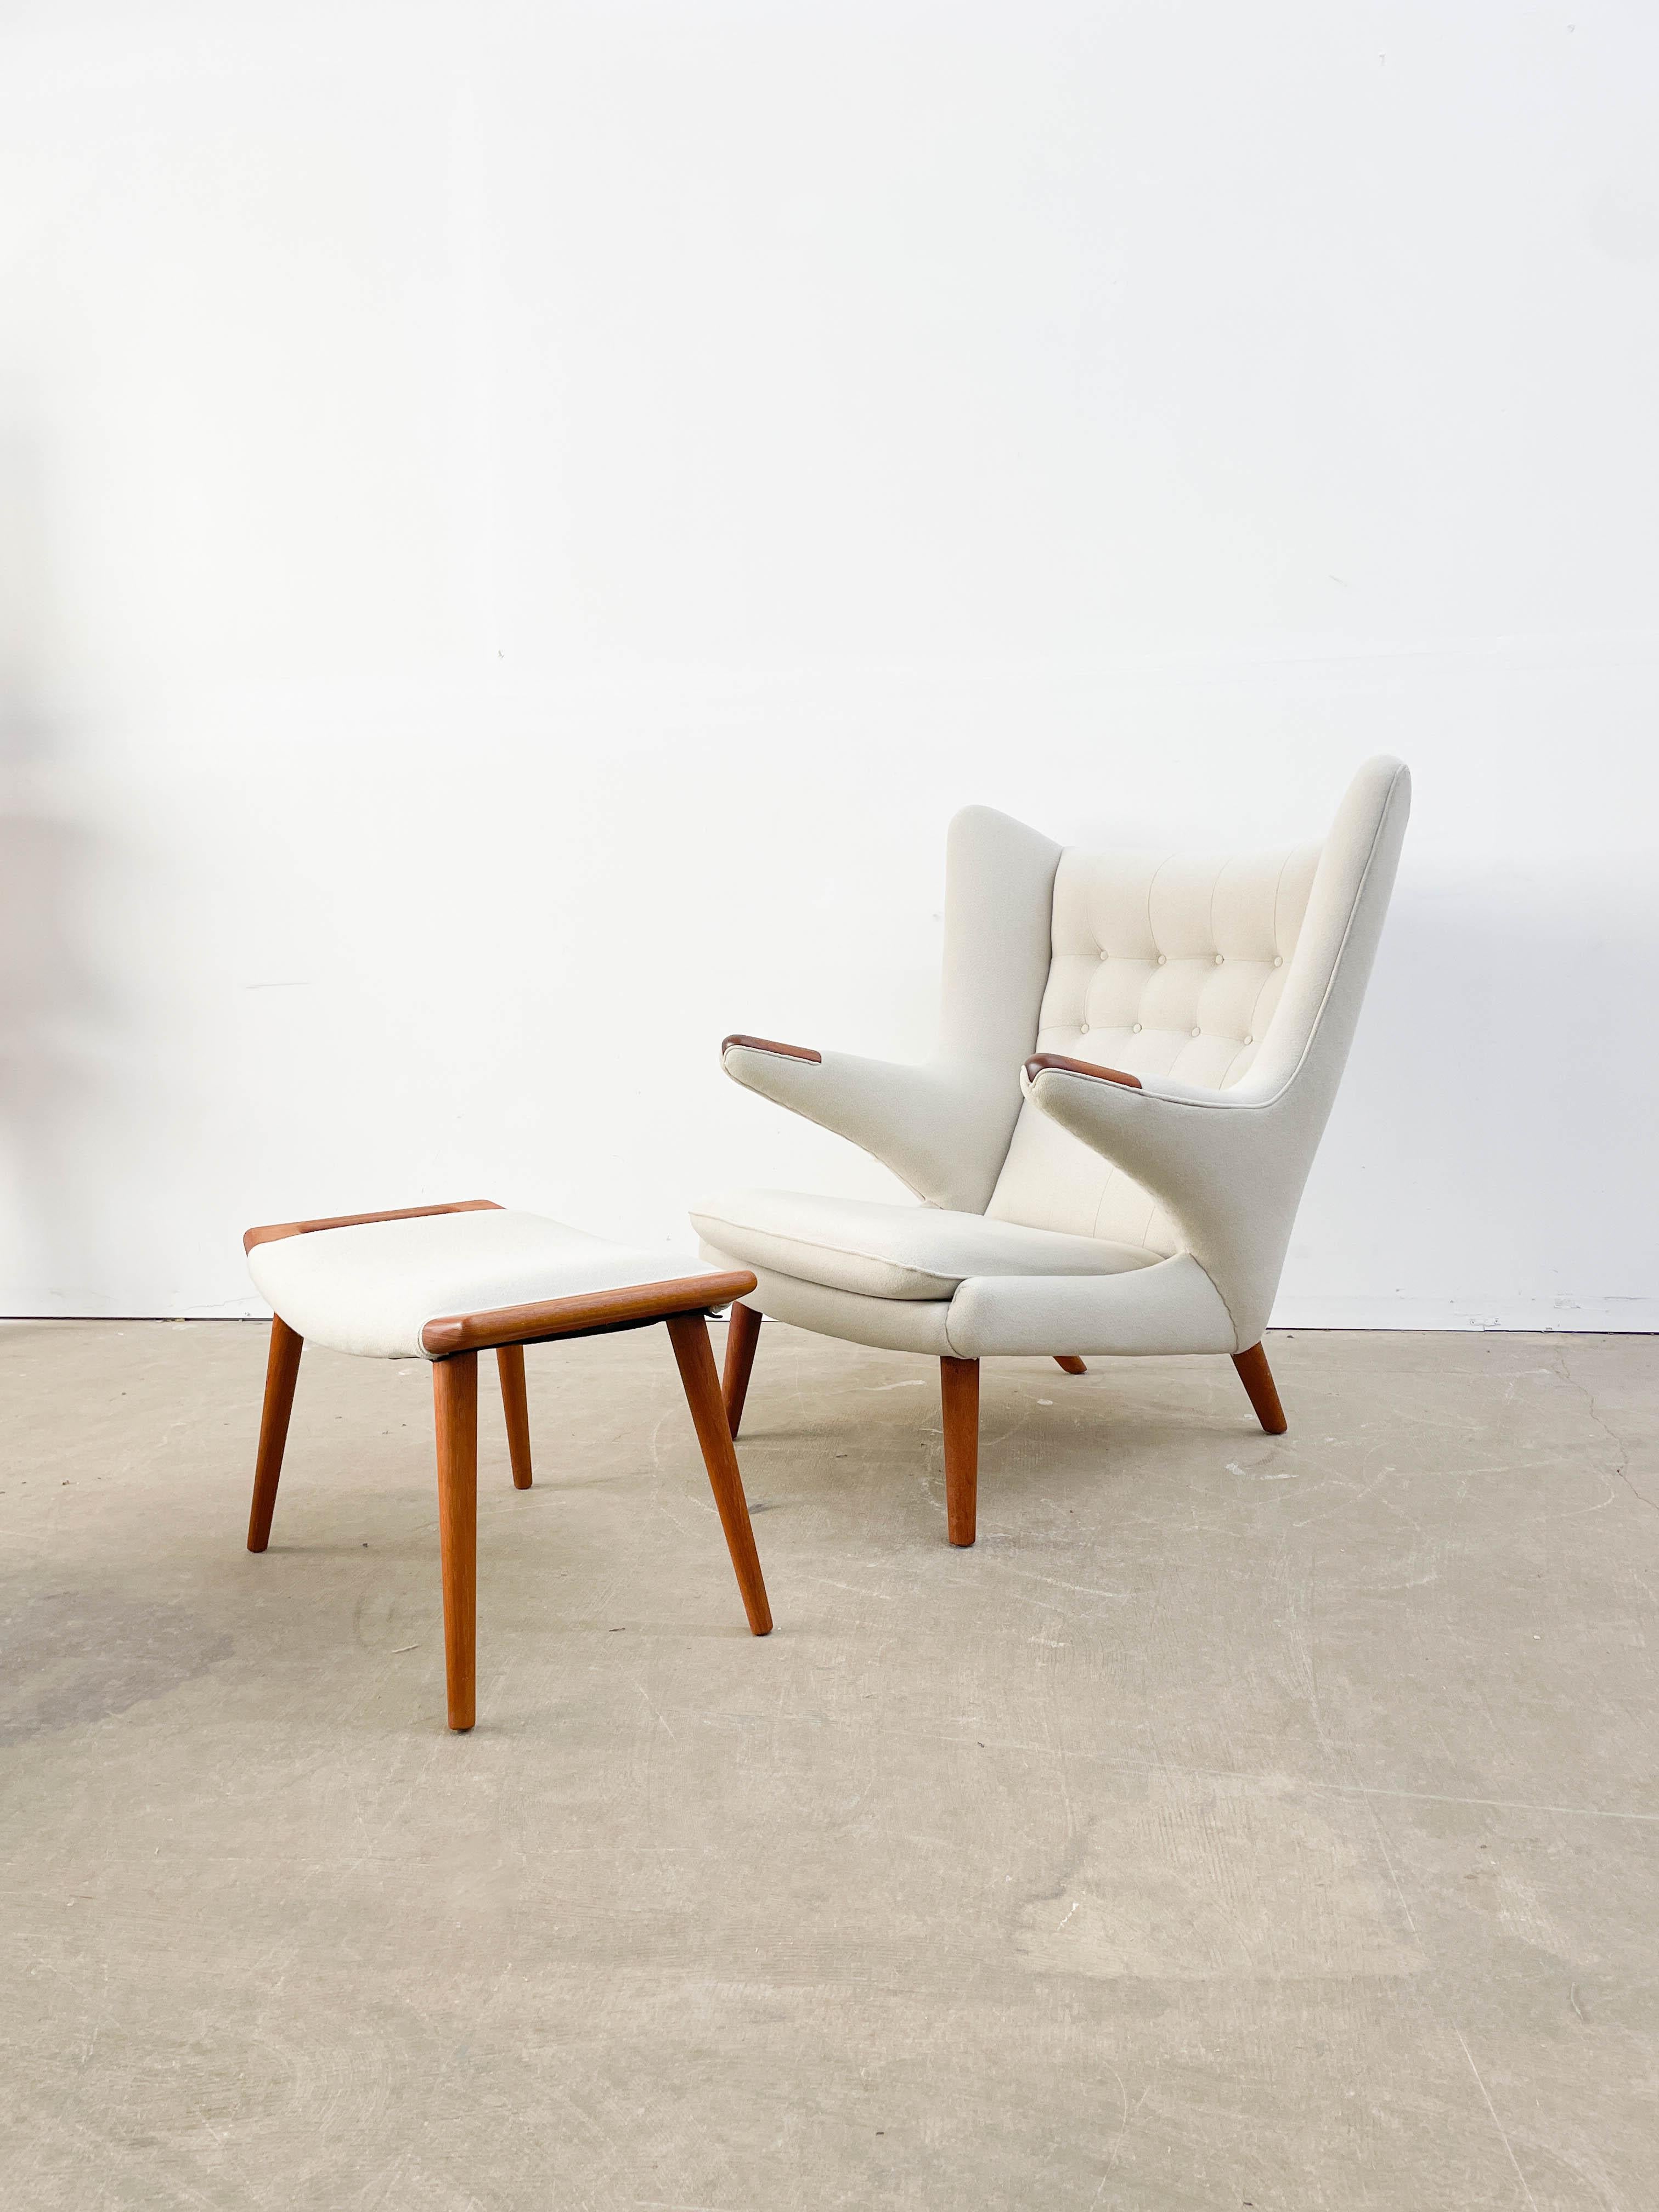 Hans Wegner's AP19 'Papa Bear' chair and ottoman. Designed in 1953 and prized for its superb comfort and striking form. This example was reupholstered in the 1990s in an excellent cream Hallingdal 65 wool. It has teak legs and paws/nails on the end